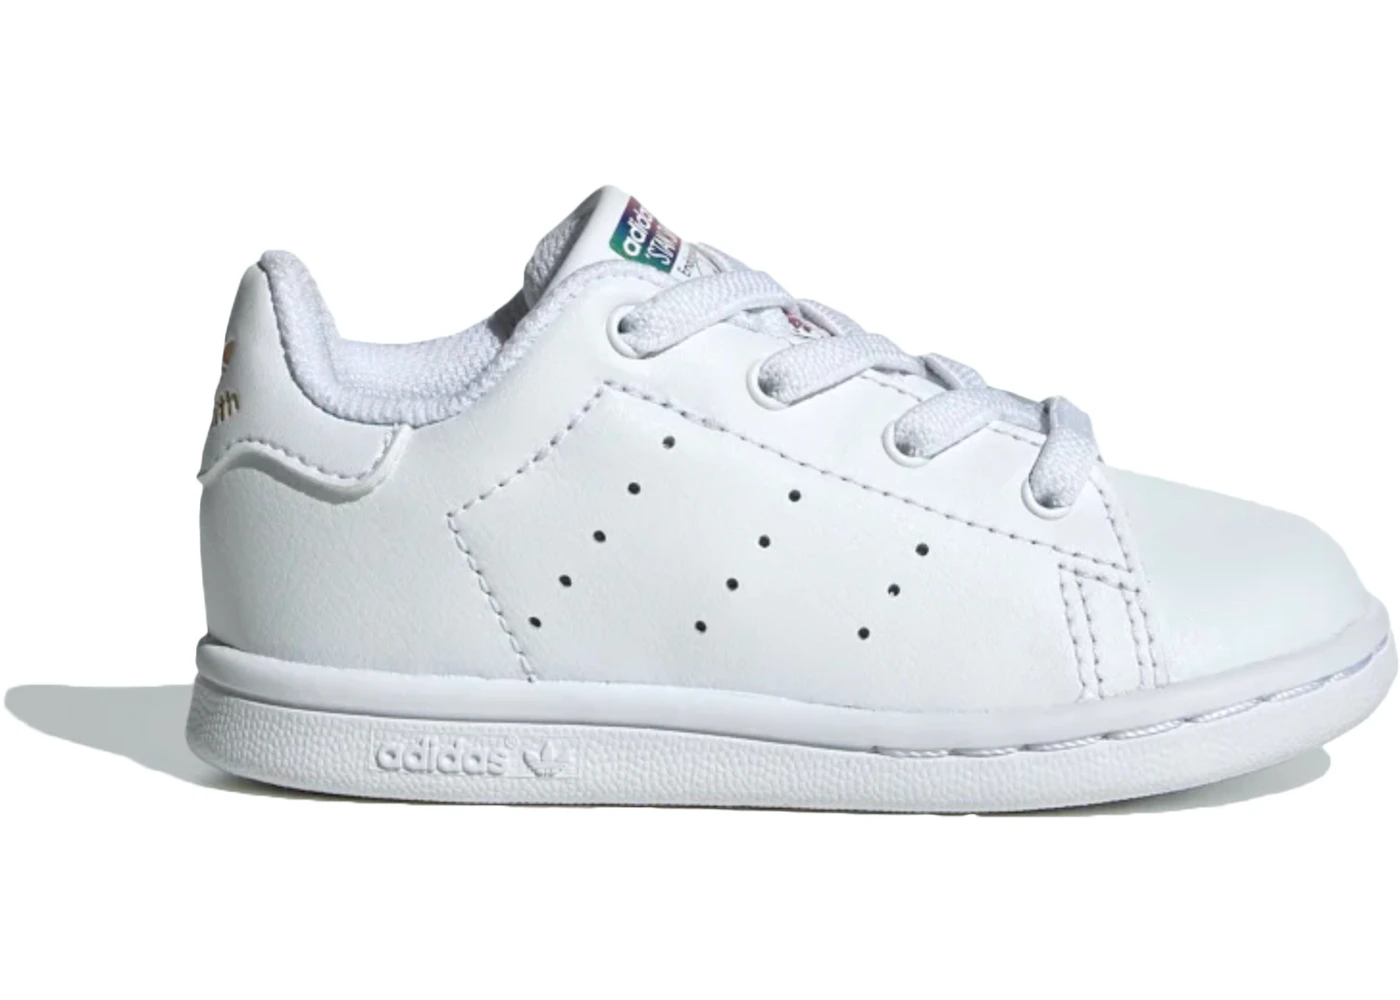 adidas Stan Smith Cloud White Core Black (TD) Toddler - EH0735 - US